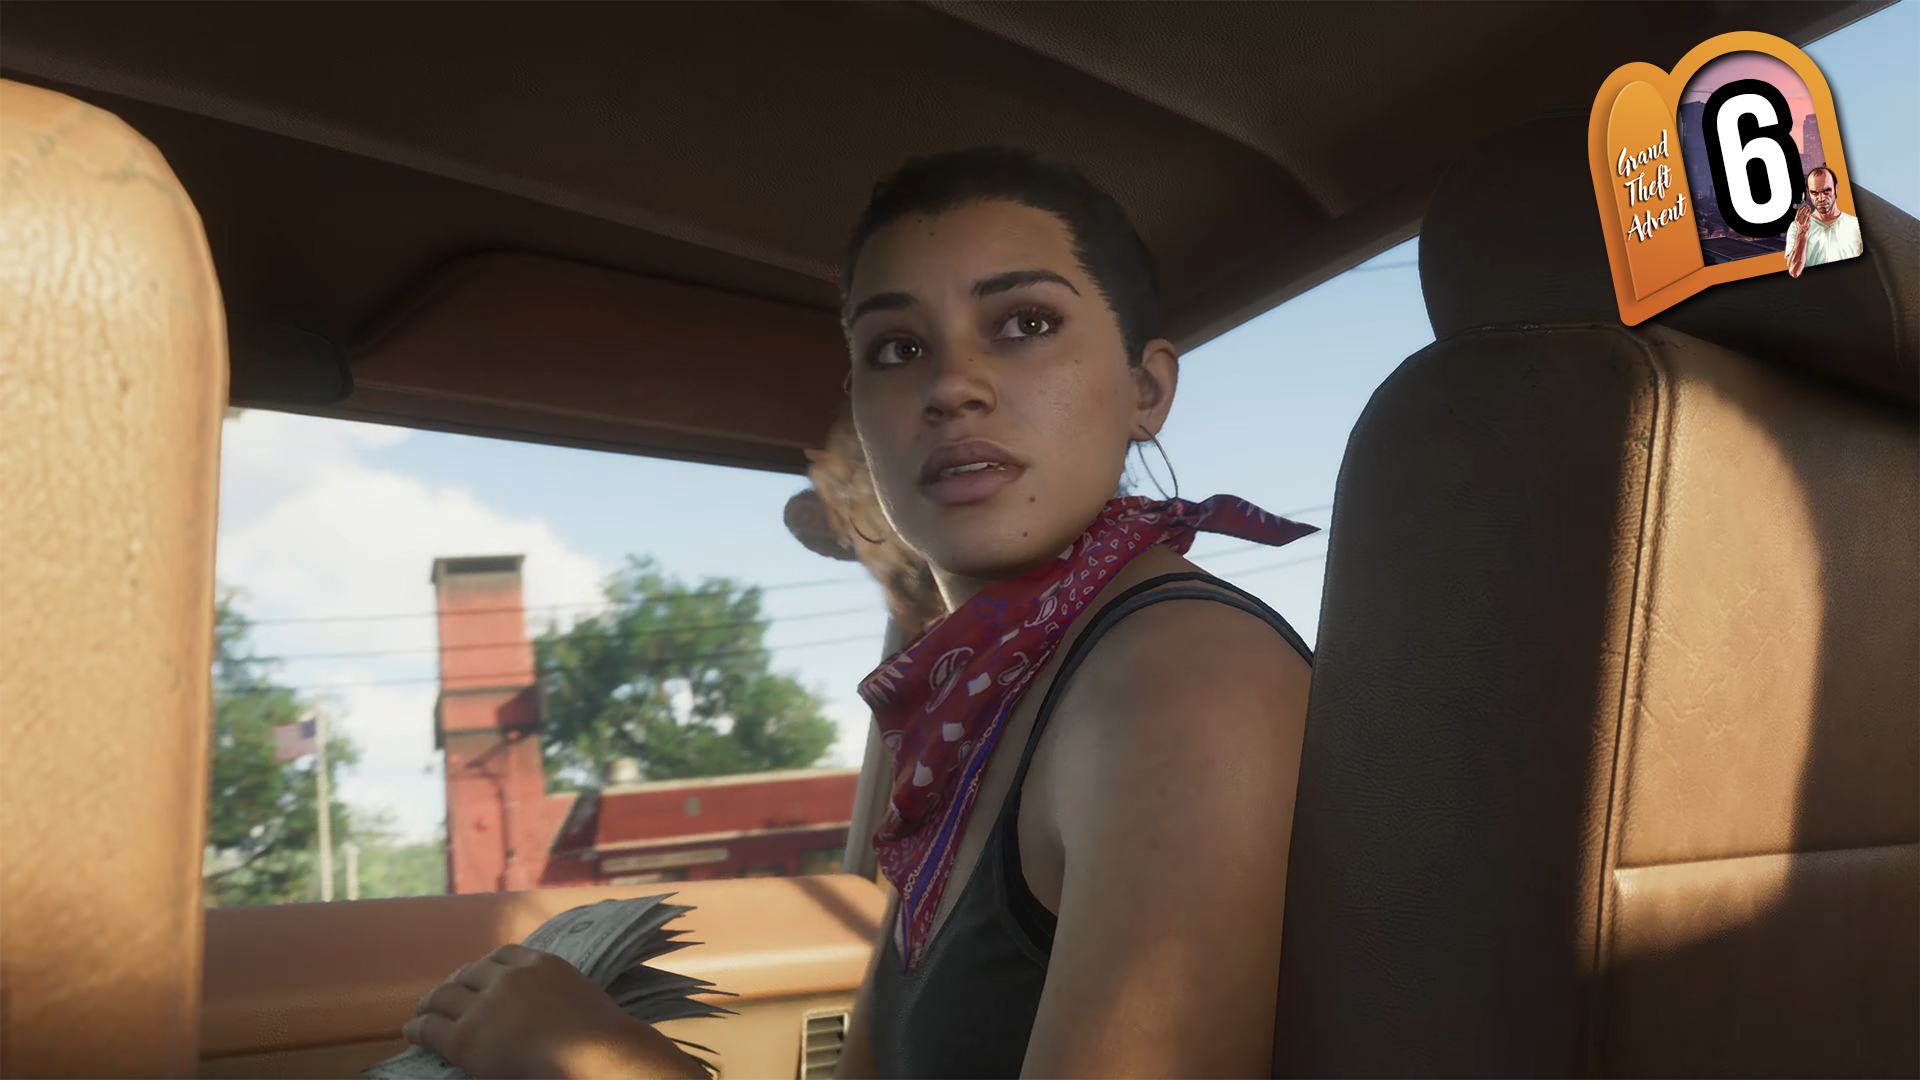 New video of GTA 6 female protagonist Lucia wows fans